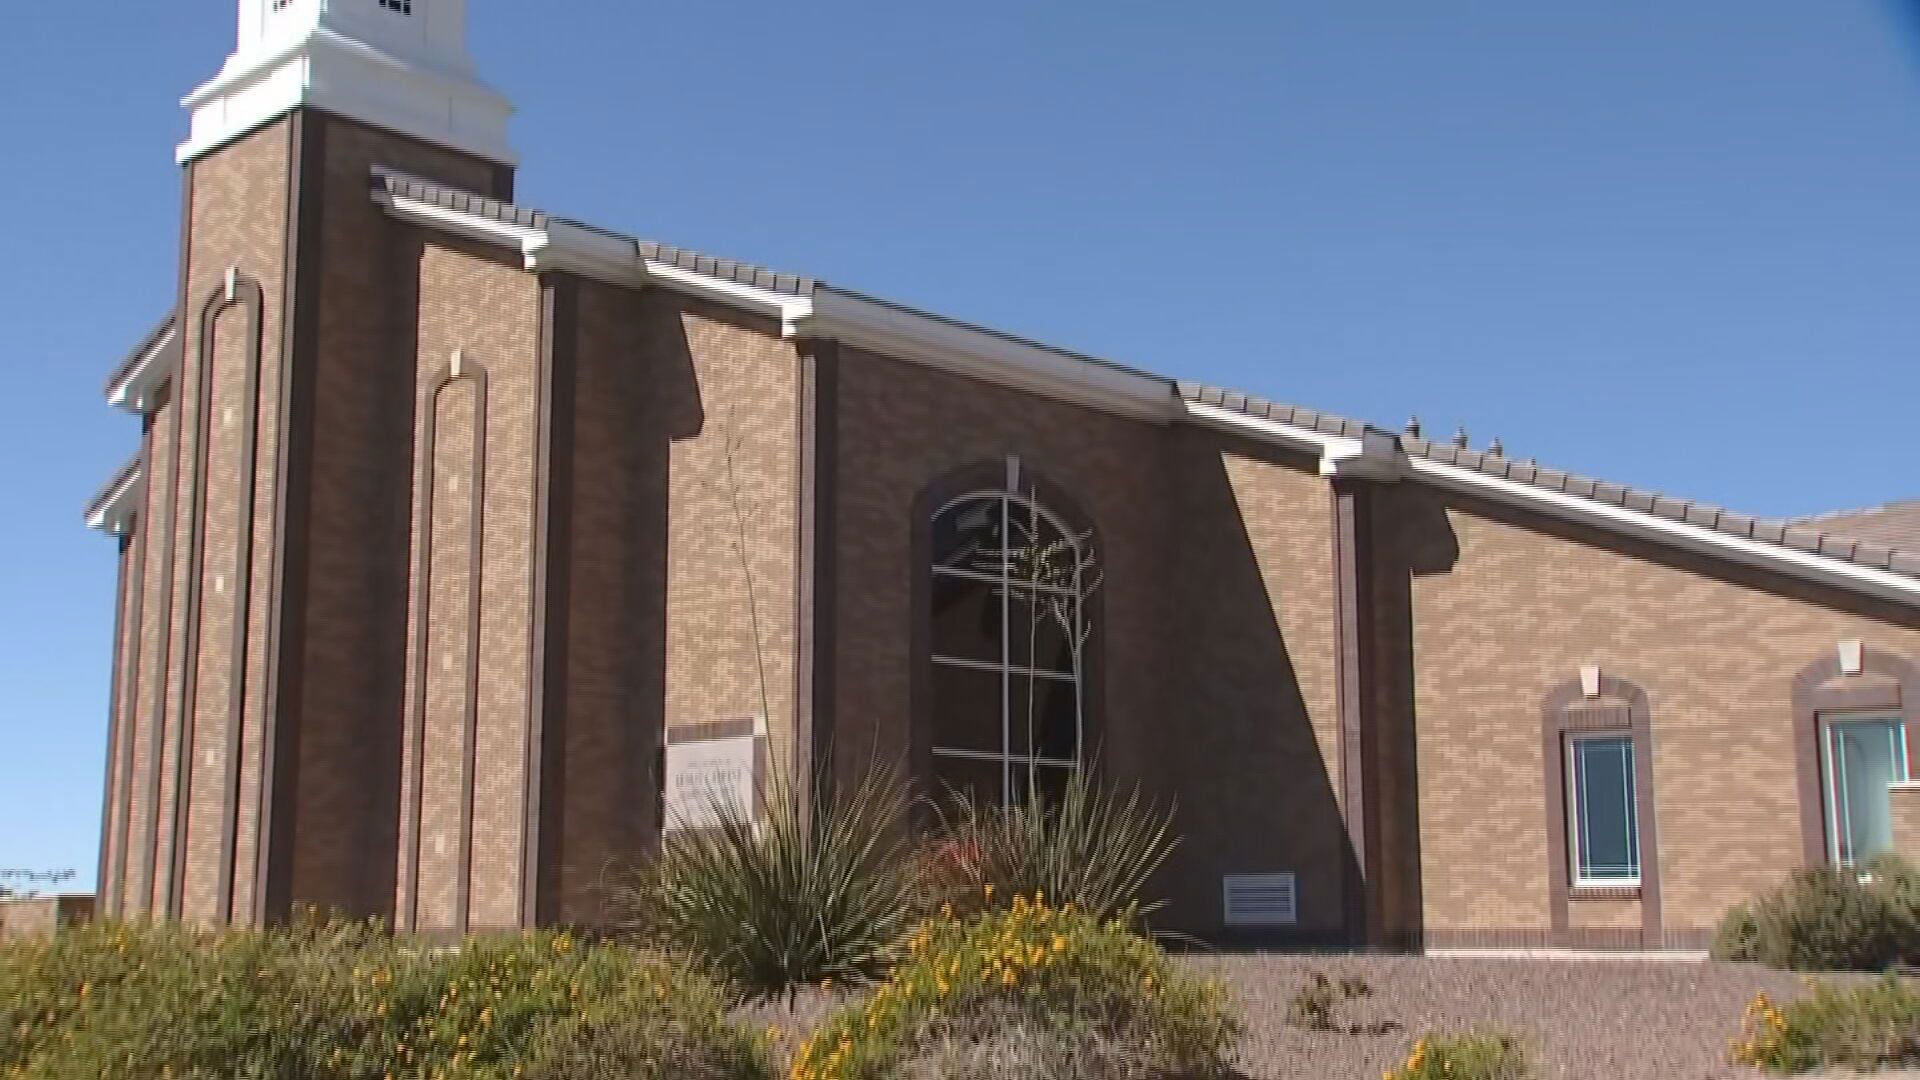 Church of Jesus Christ of Latter-Day Saints plans to build temple in Yuma